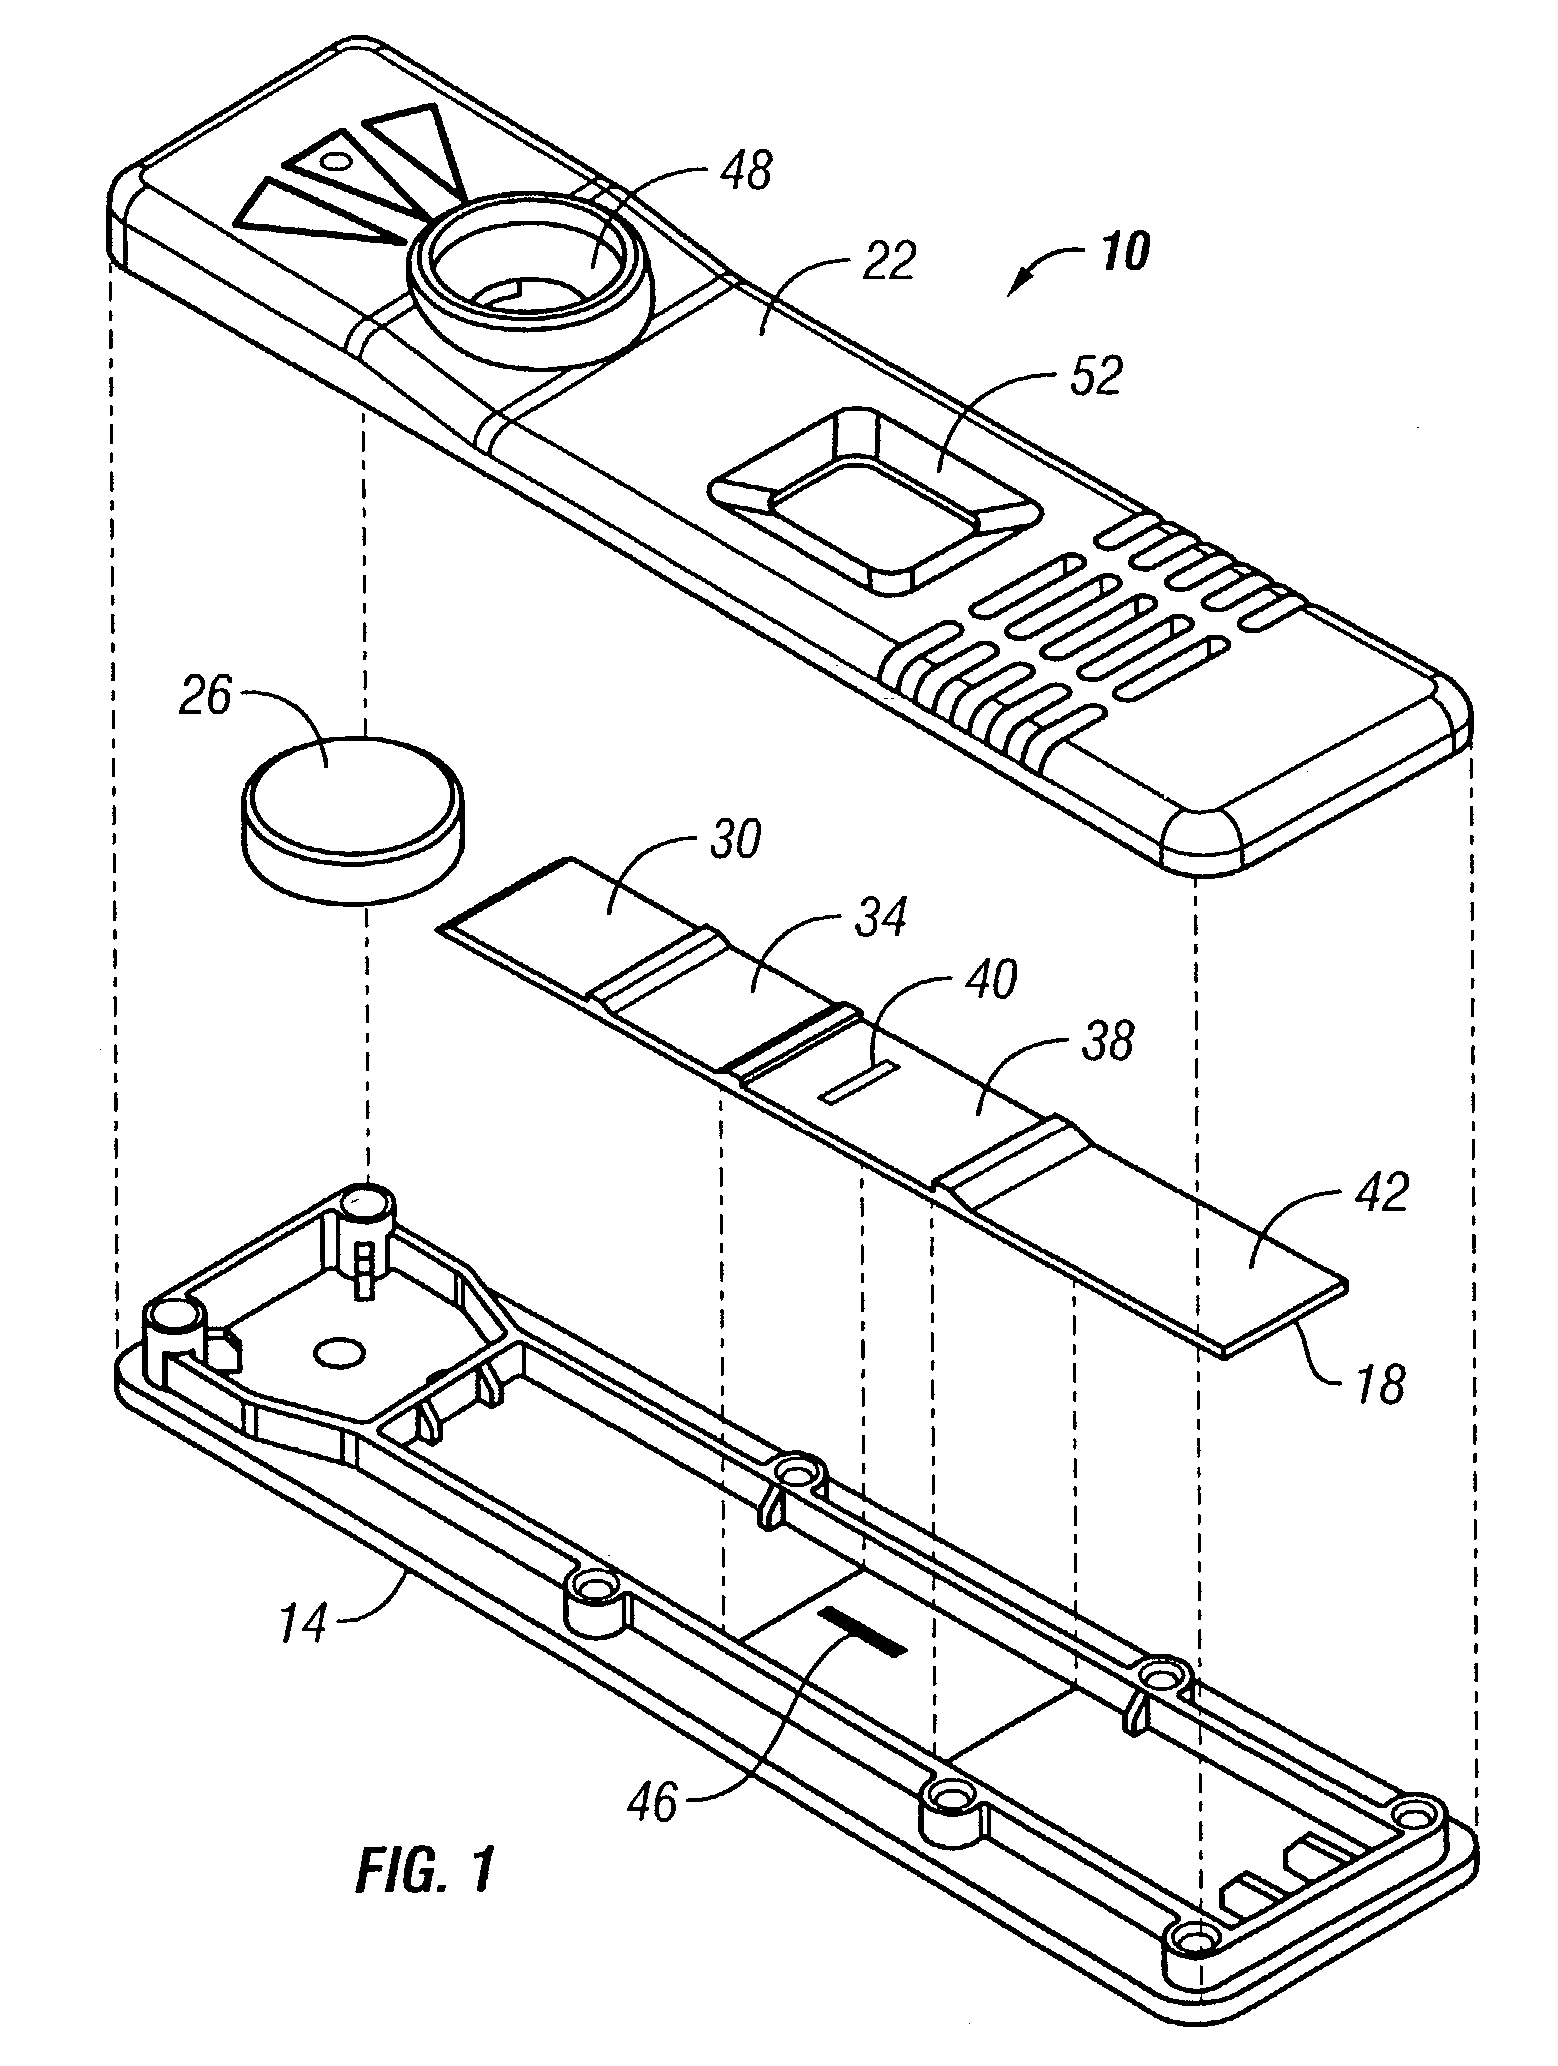 Method for adding an apparent non-signal line to a rapid diagnostic assay